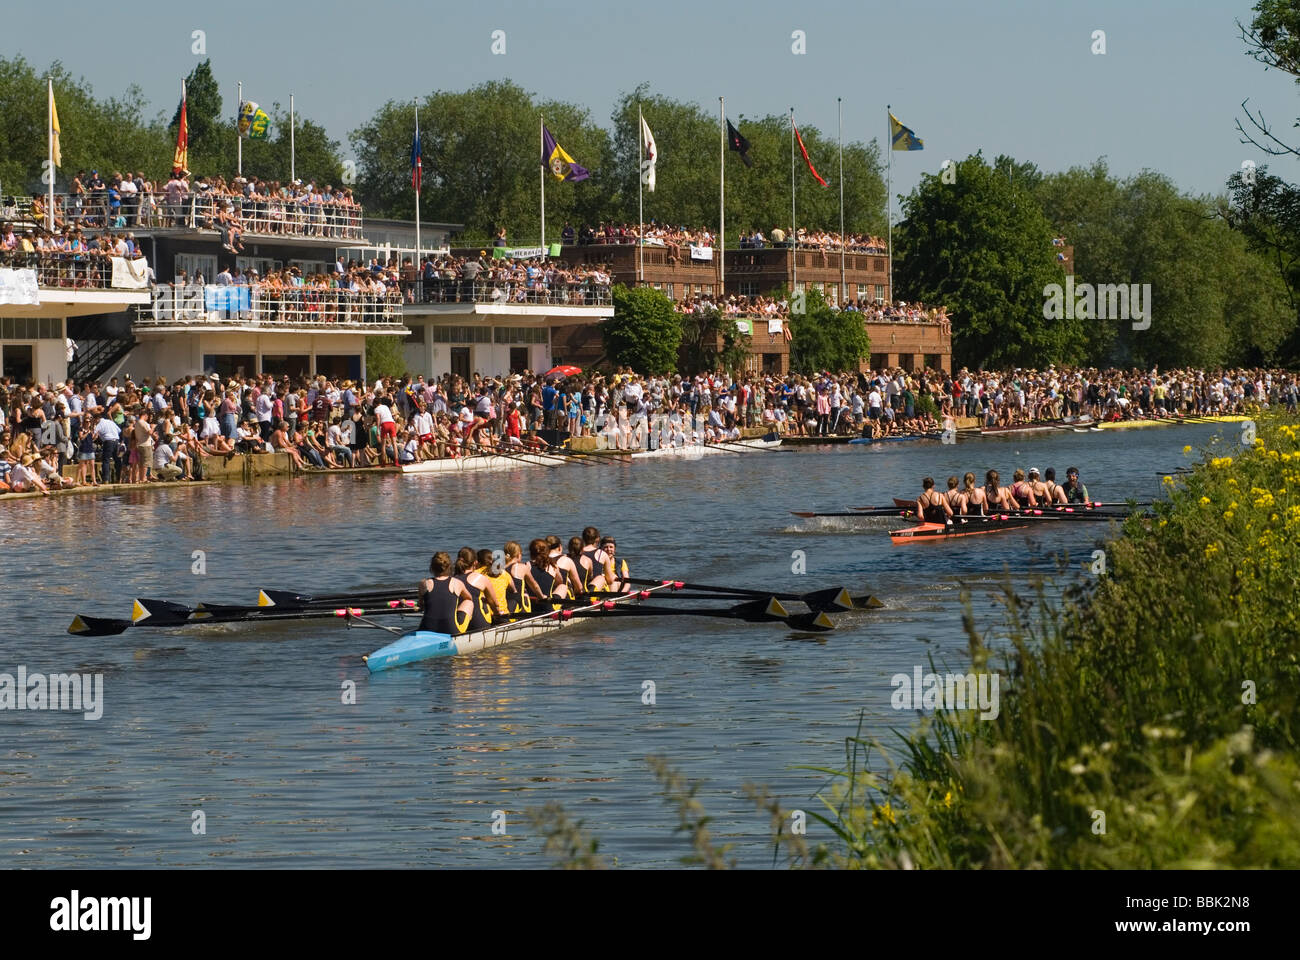 Oxford University Rowing Clubs Eights Week la club house canottaggio Gare sul fiume Isis attualmente fiume Tamigi Oxfordshire 2009 HOMER SYKES 2000 Foto Stock